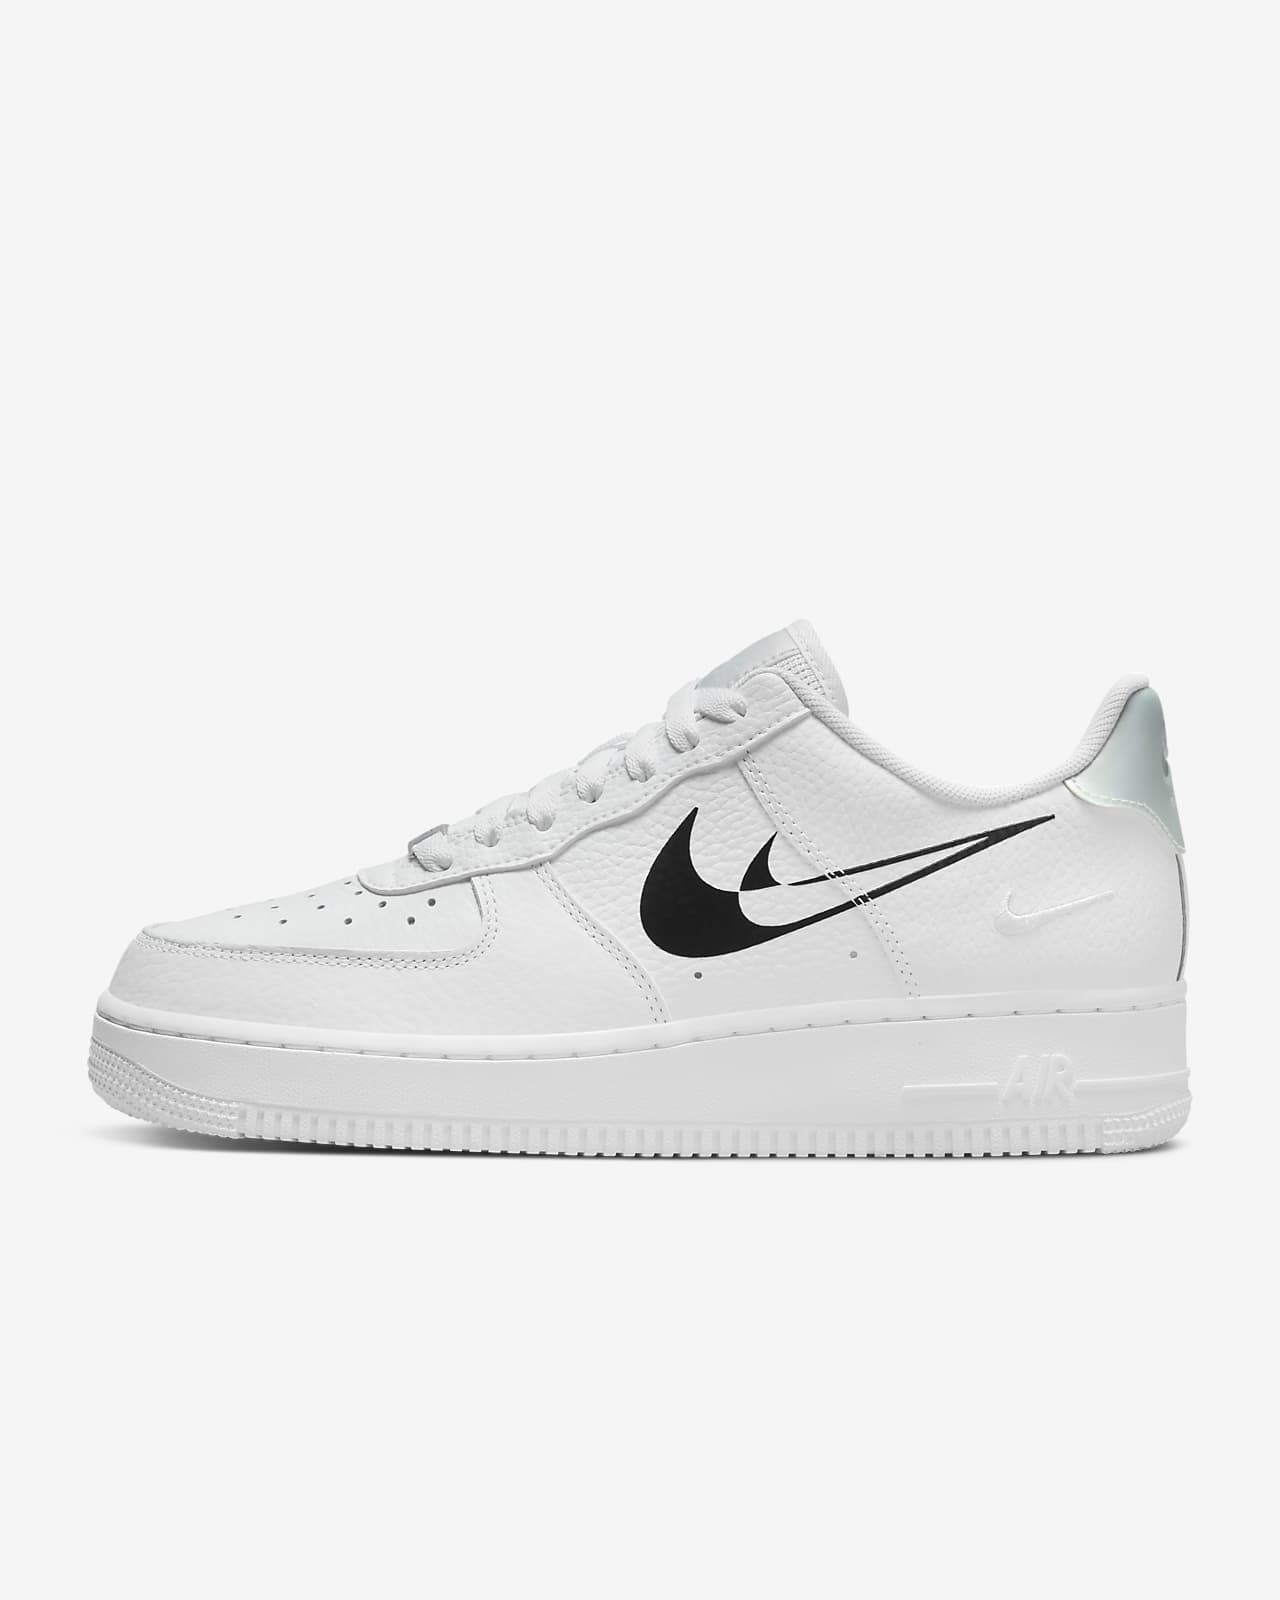 Nike Air Force 1 LO '07 Women's Shoes